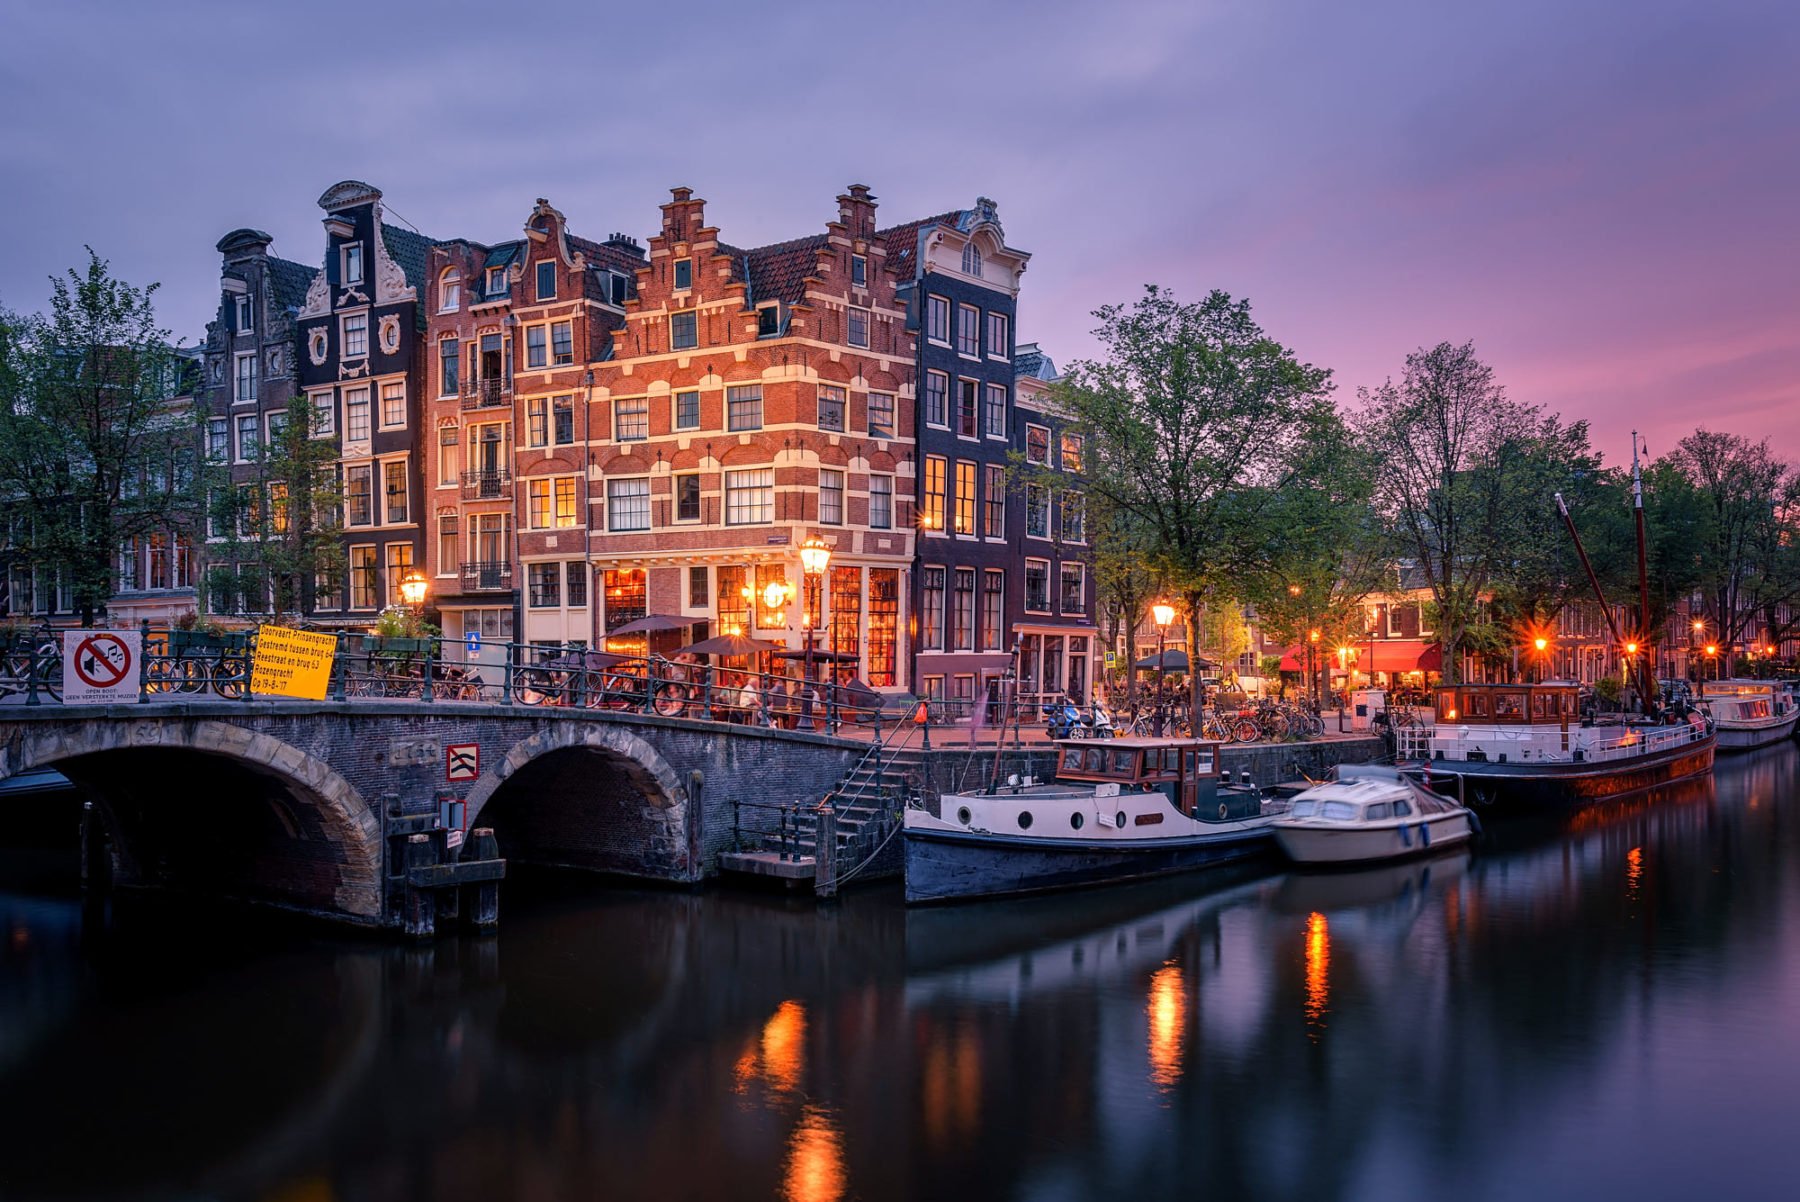 Join Topaz Labs in Amsterdam for a Free Night Photography Workshop ...